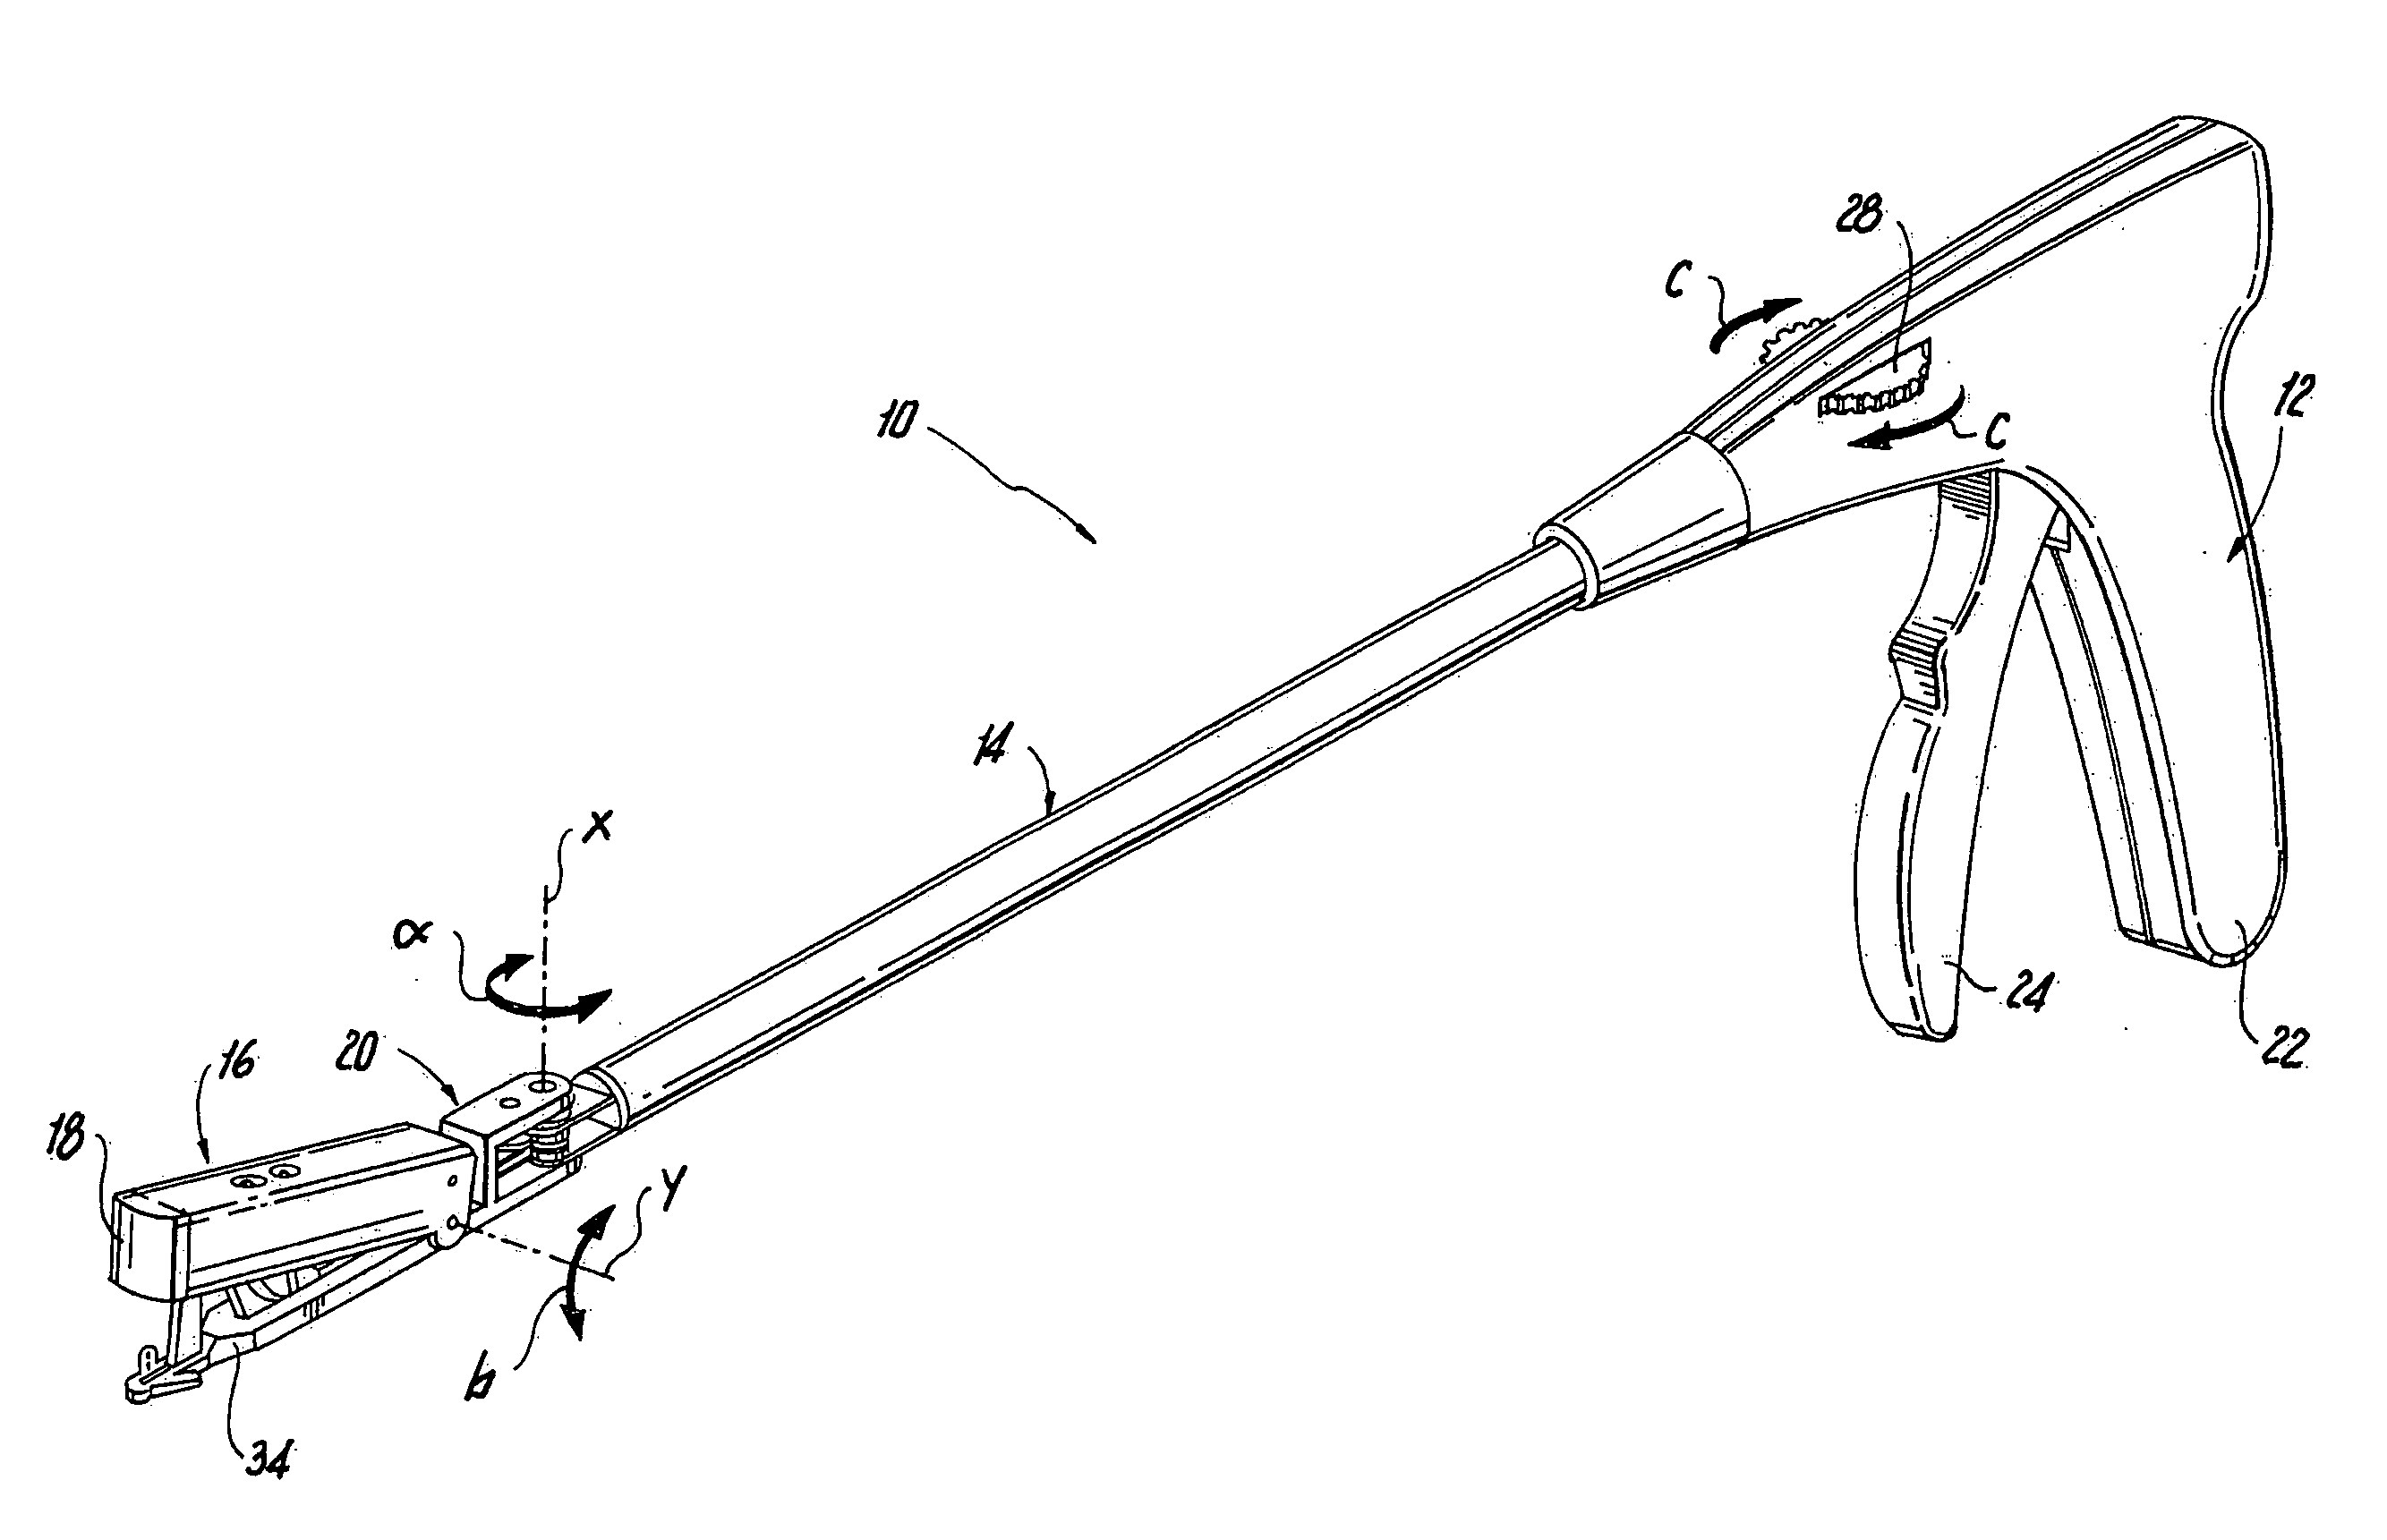 Surgical instrument for progressively stapling and incising tissue